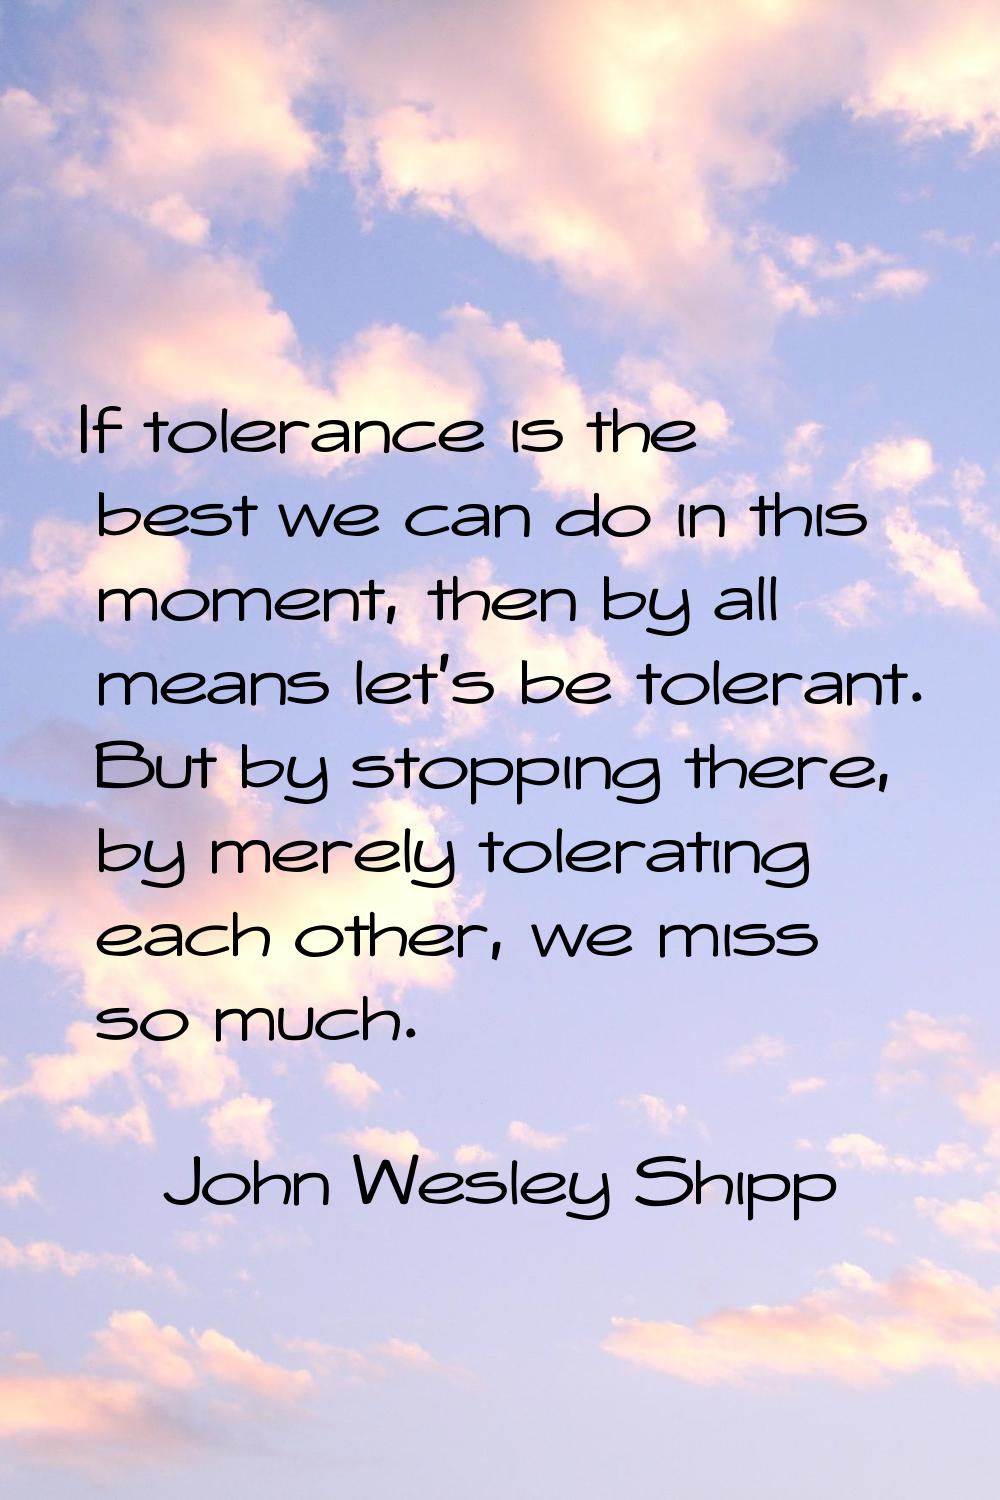 If tolerance is the best we can do in this moment, then by all means let's be tolerant. But by stop